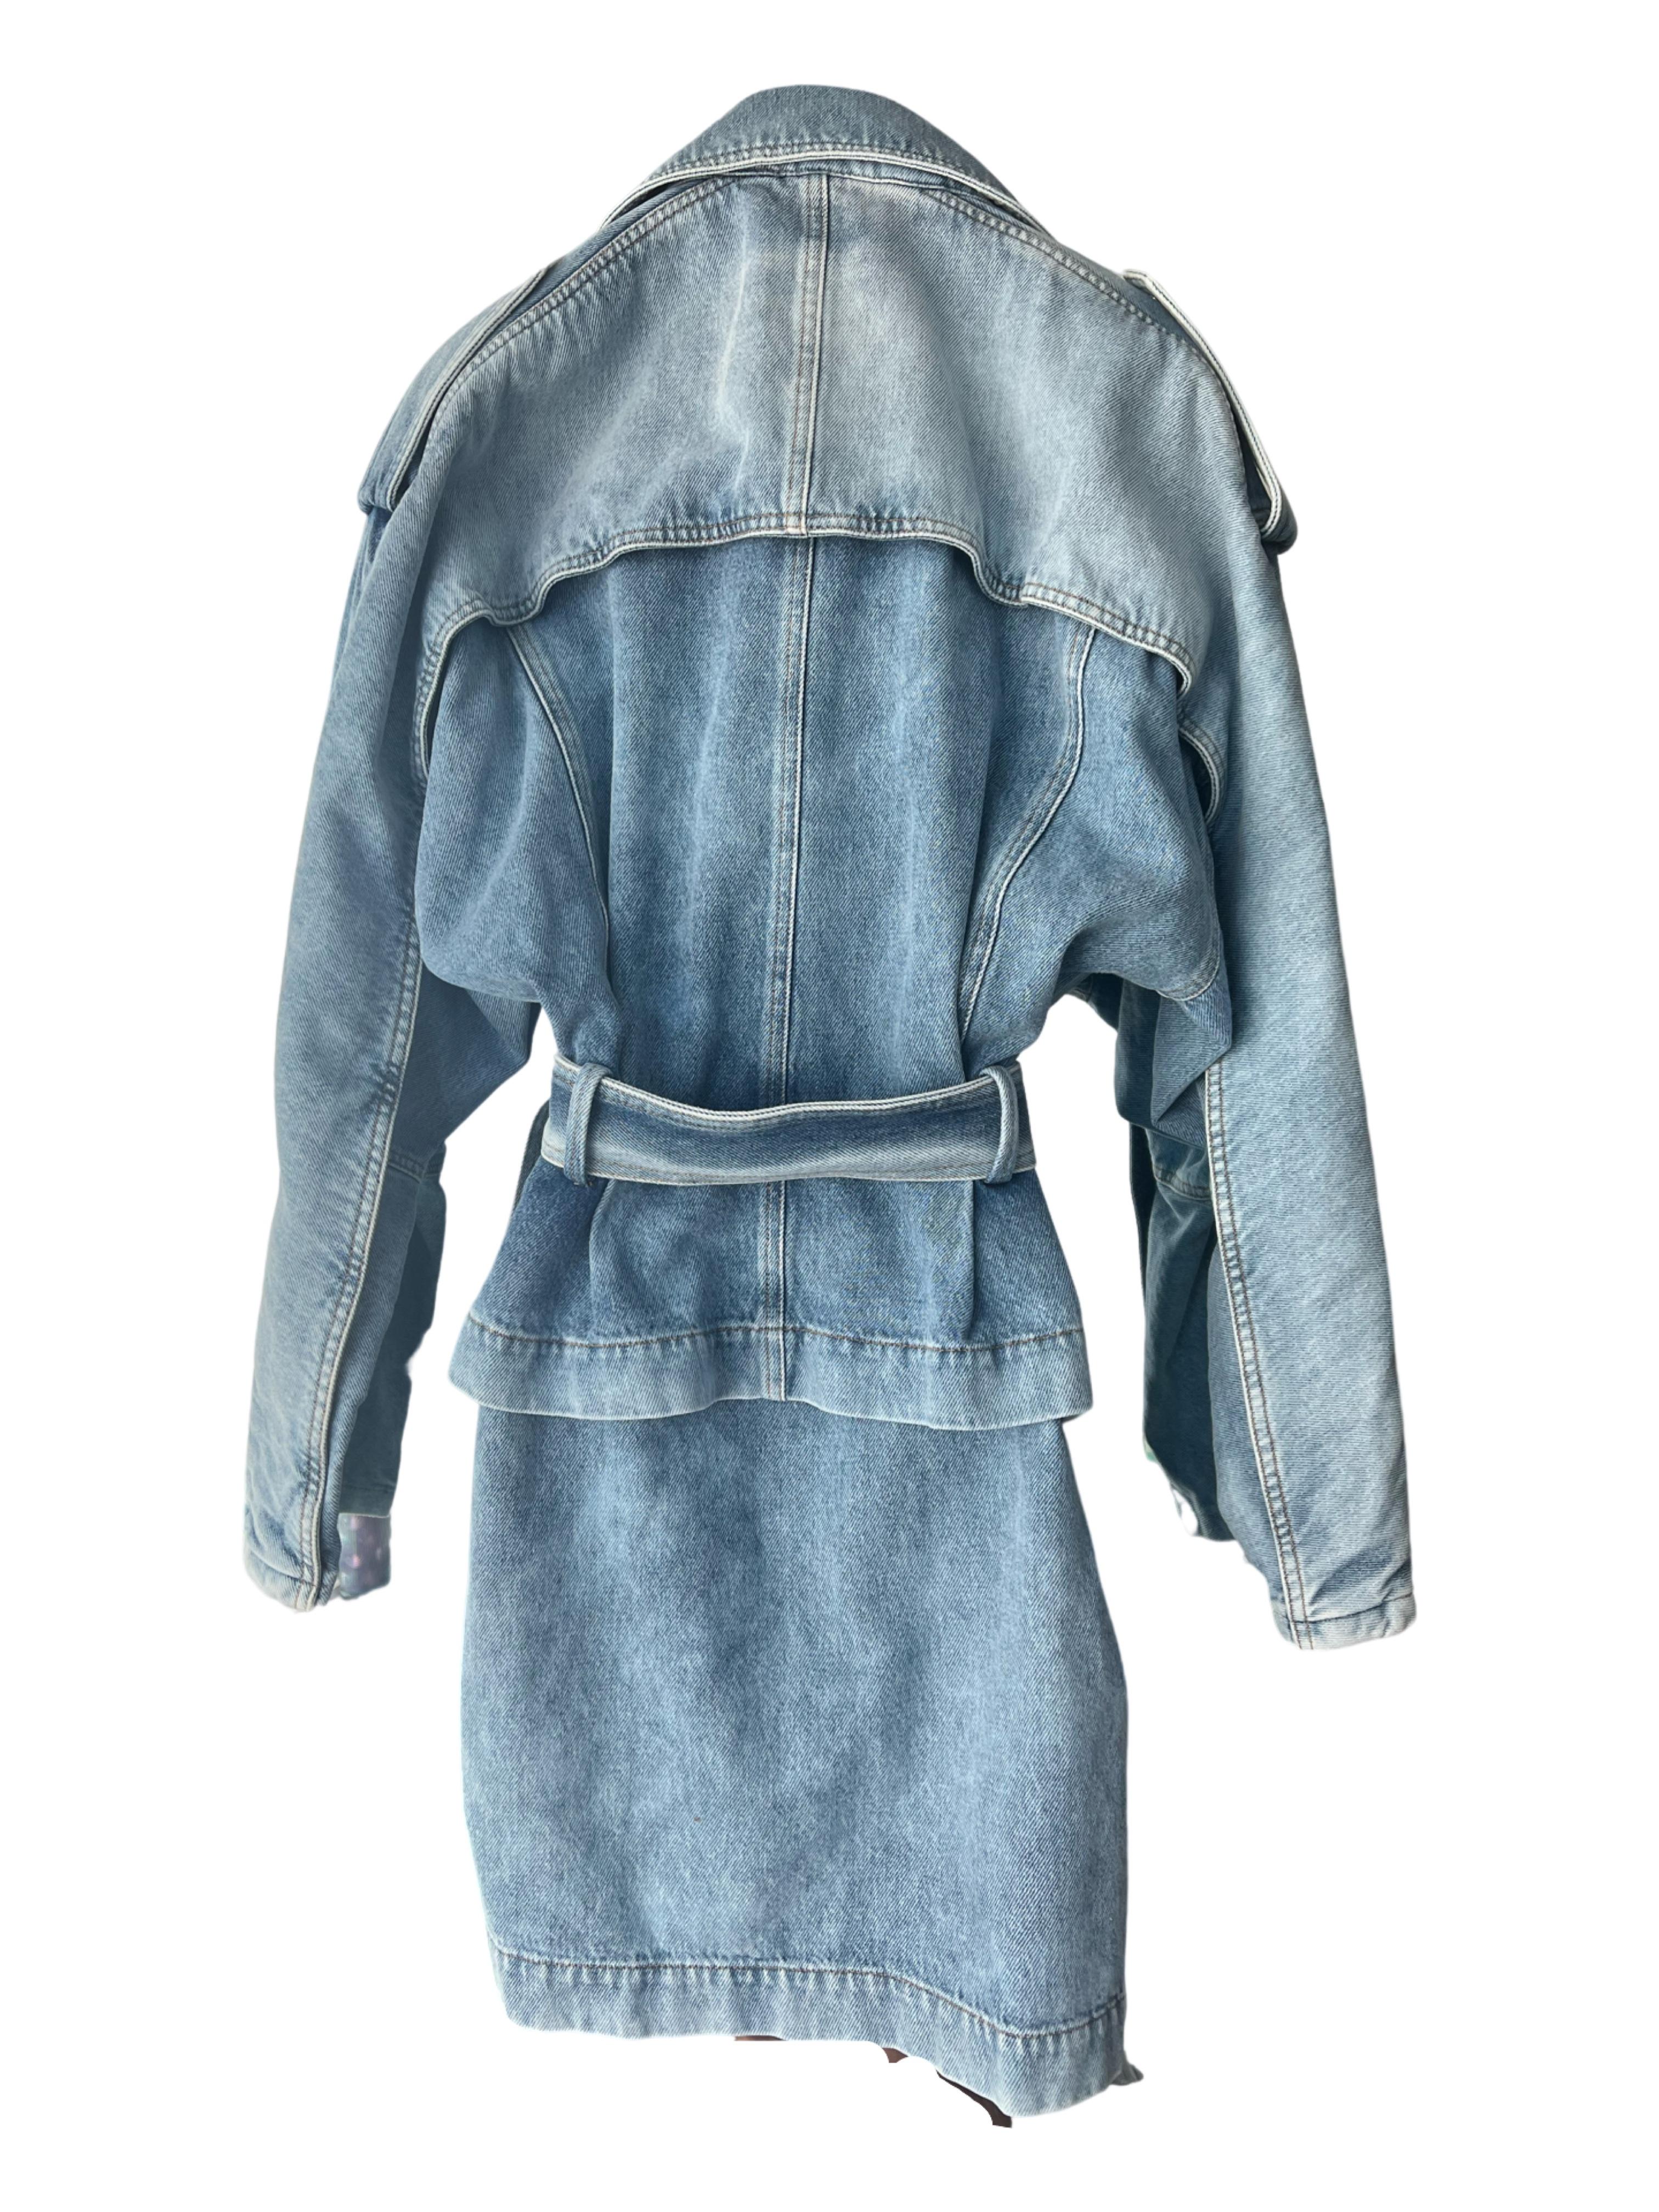 The Alexander Vauthier 70's inspired denim dress is a fashionable and retro-inspired garment that pays homage to the iconic fashion era of the 1970s. Known for its bold and distinctive style, this denim dress captures the essence of that era while